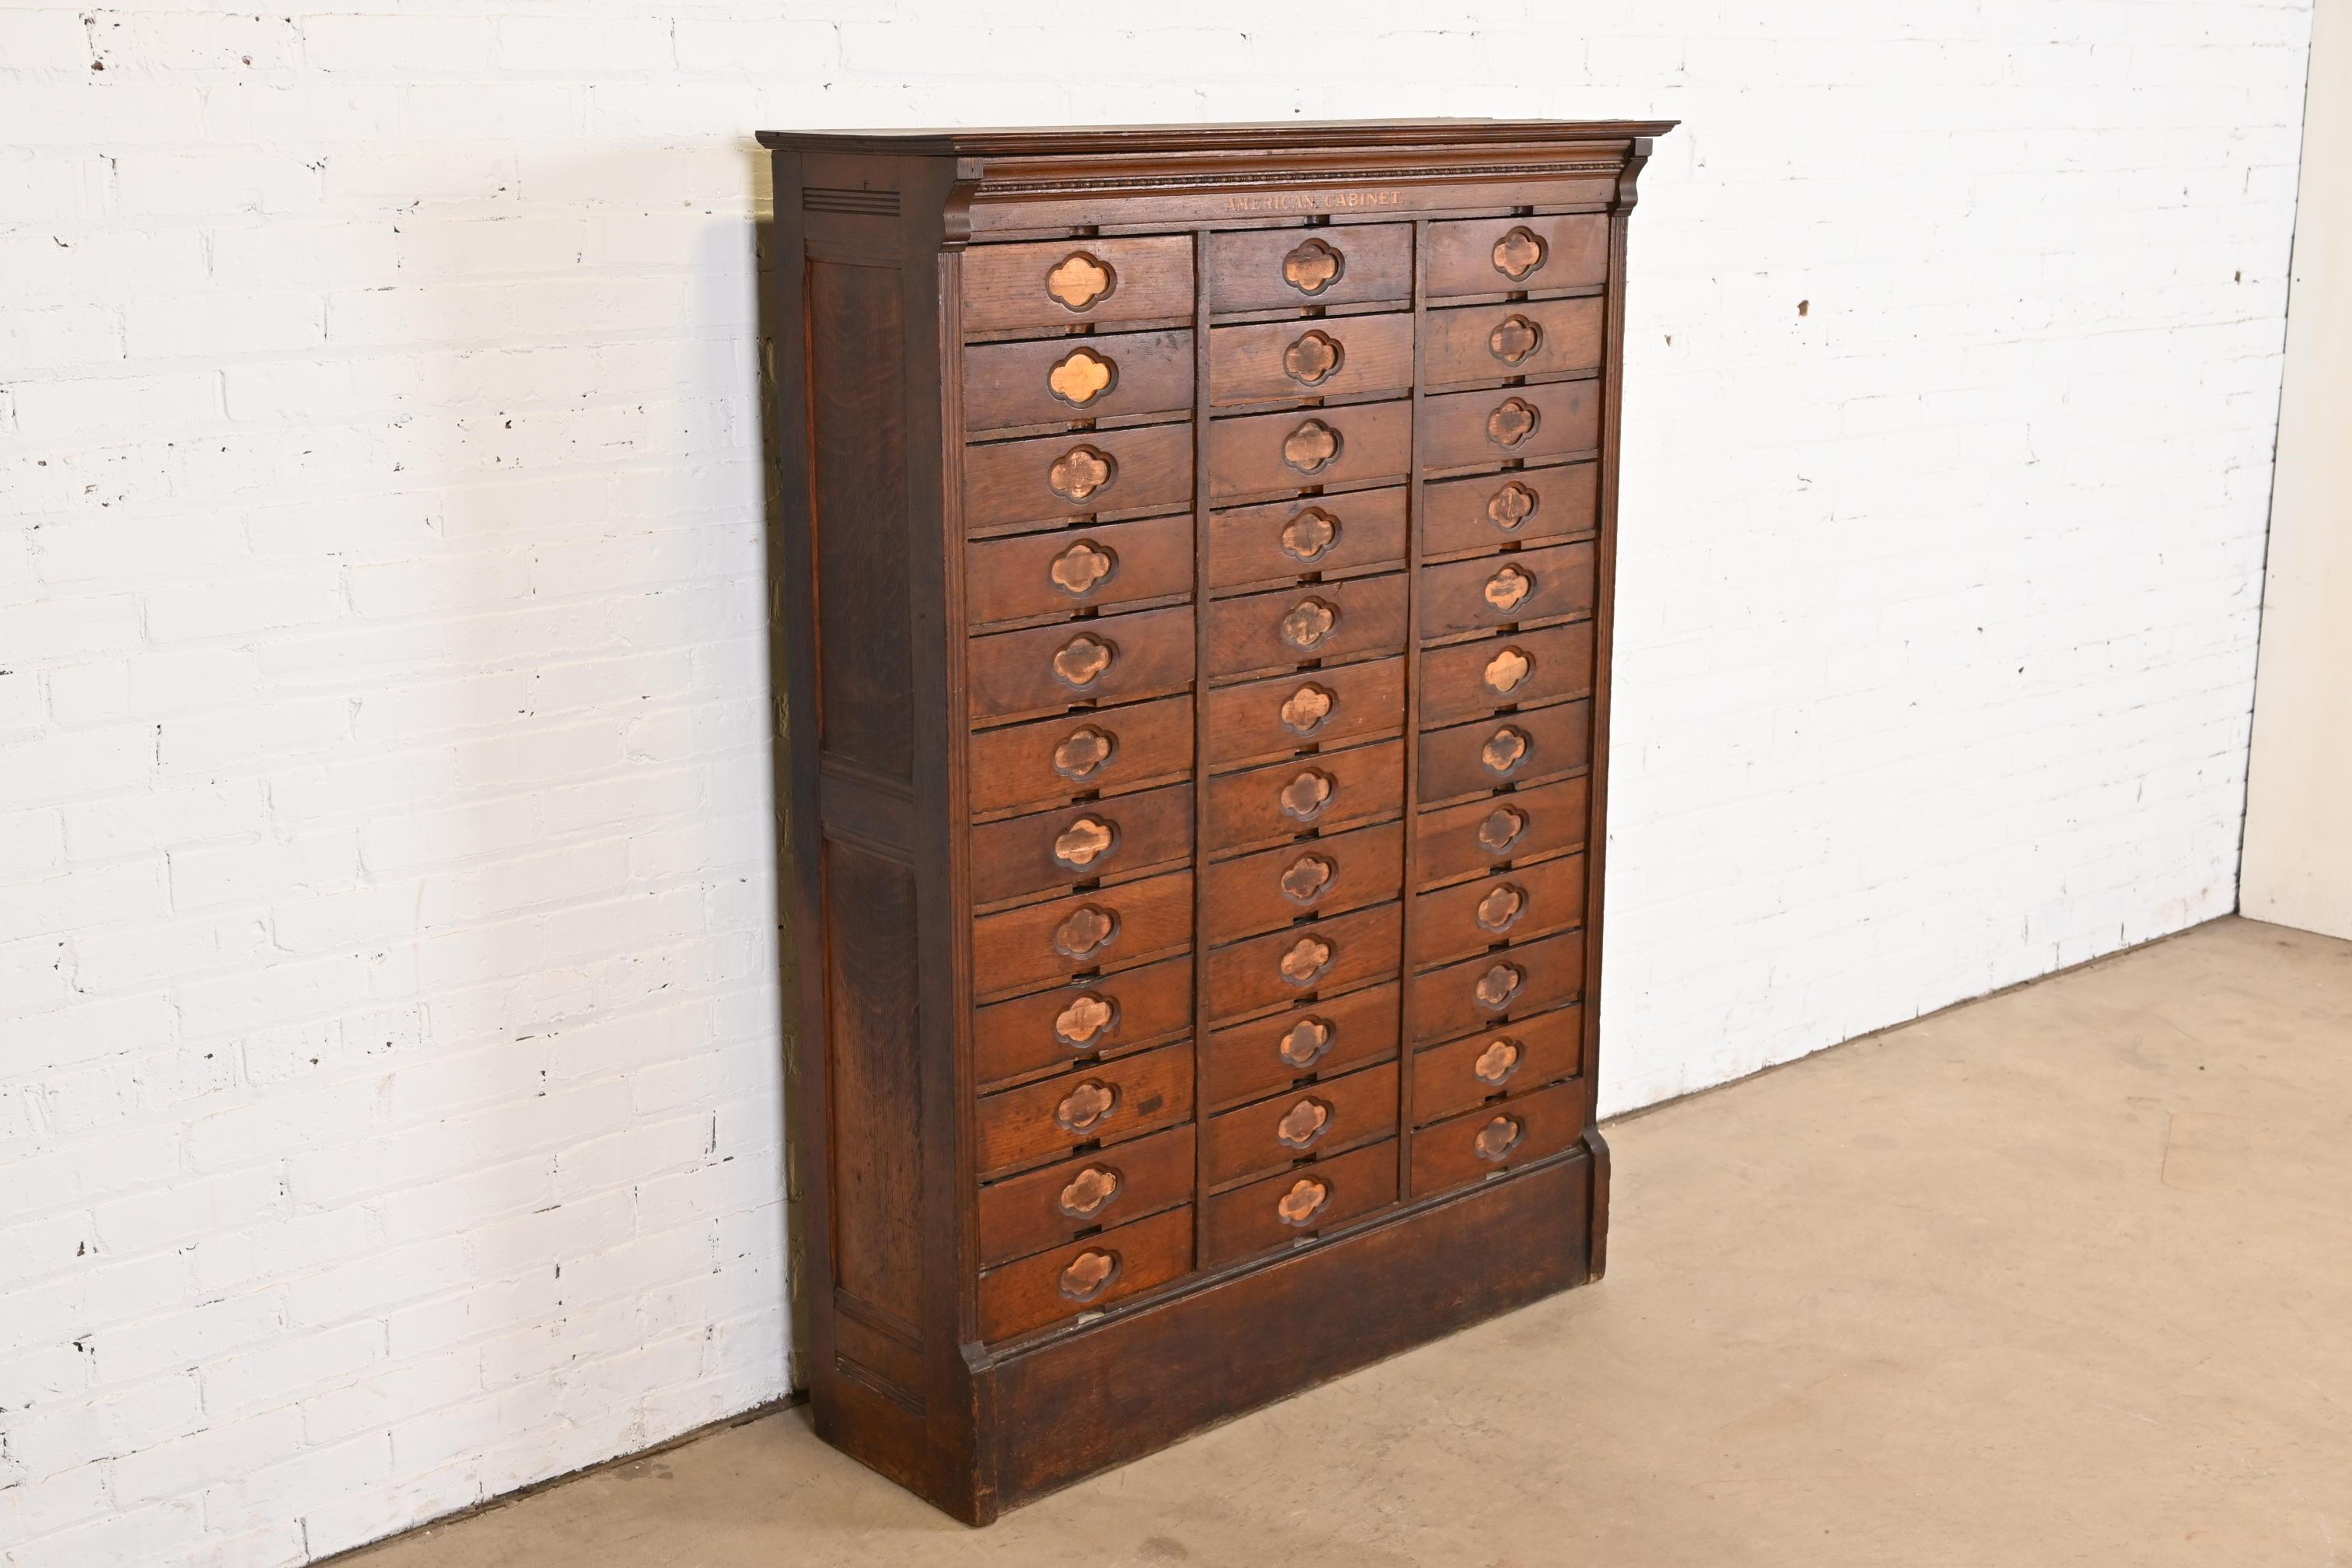 Antique Arts & Crafts 36-Drawer File Cabinet by American Cabinet Co., Circa 1900 In Good Condition For Sale In South Bend, IN